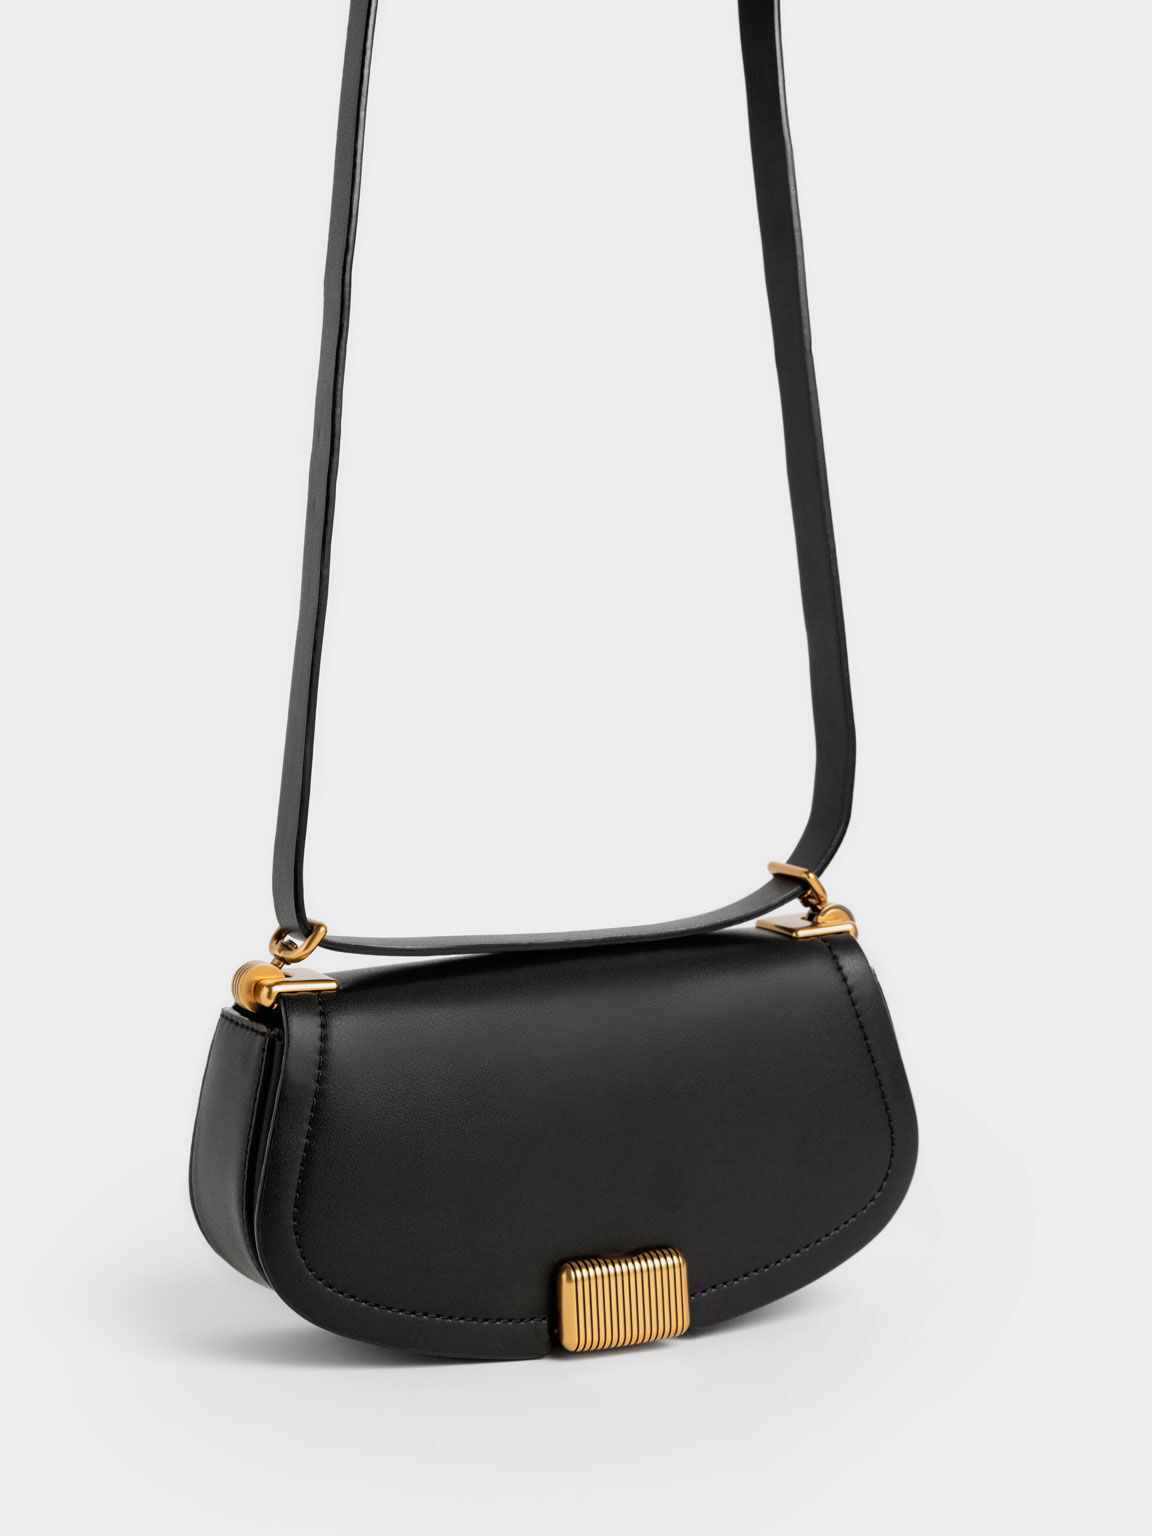 My favorite bags from Charles and Keith | Gallery posted by Kanchana |  Lemon8